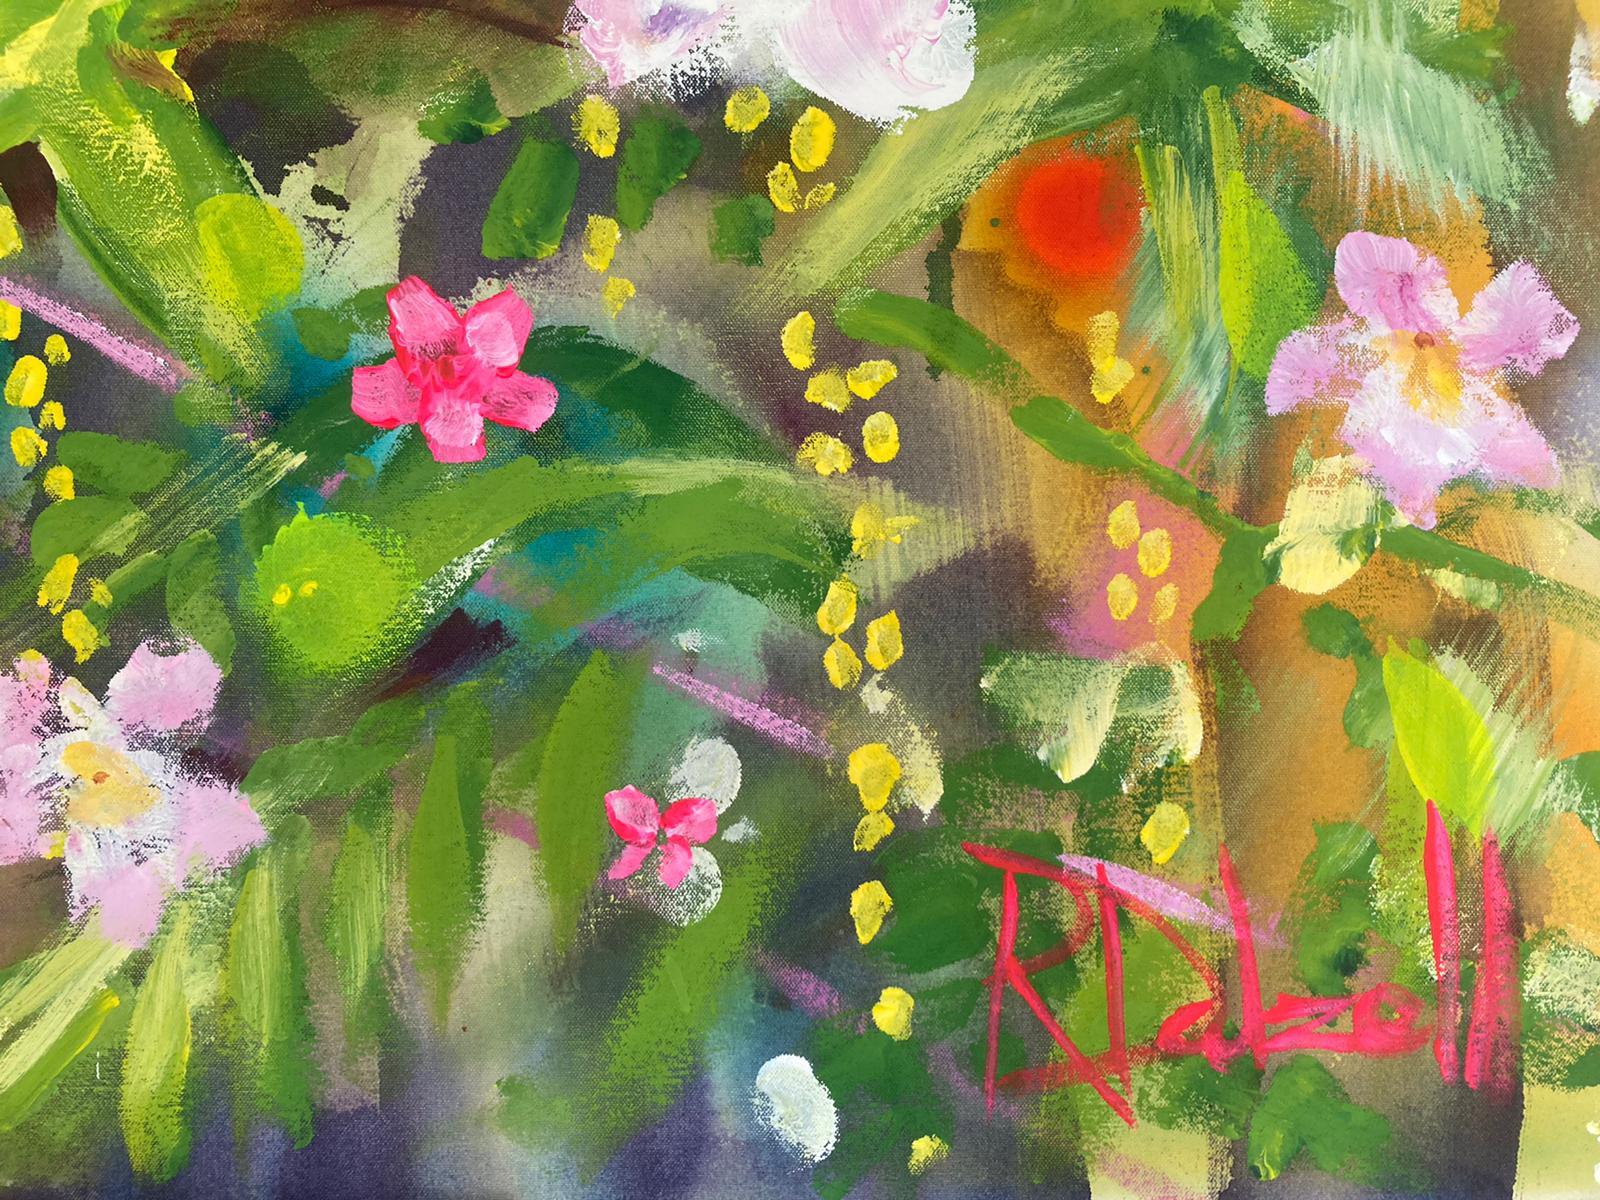 Taking time to blossom by Rachael Dalzell, acrylic on canvas 1